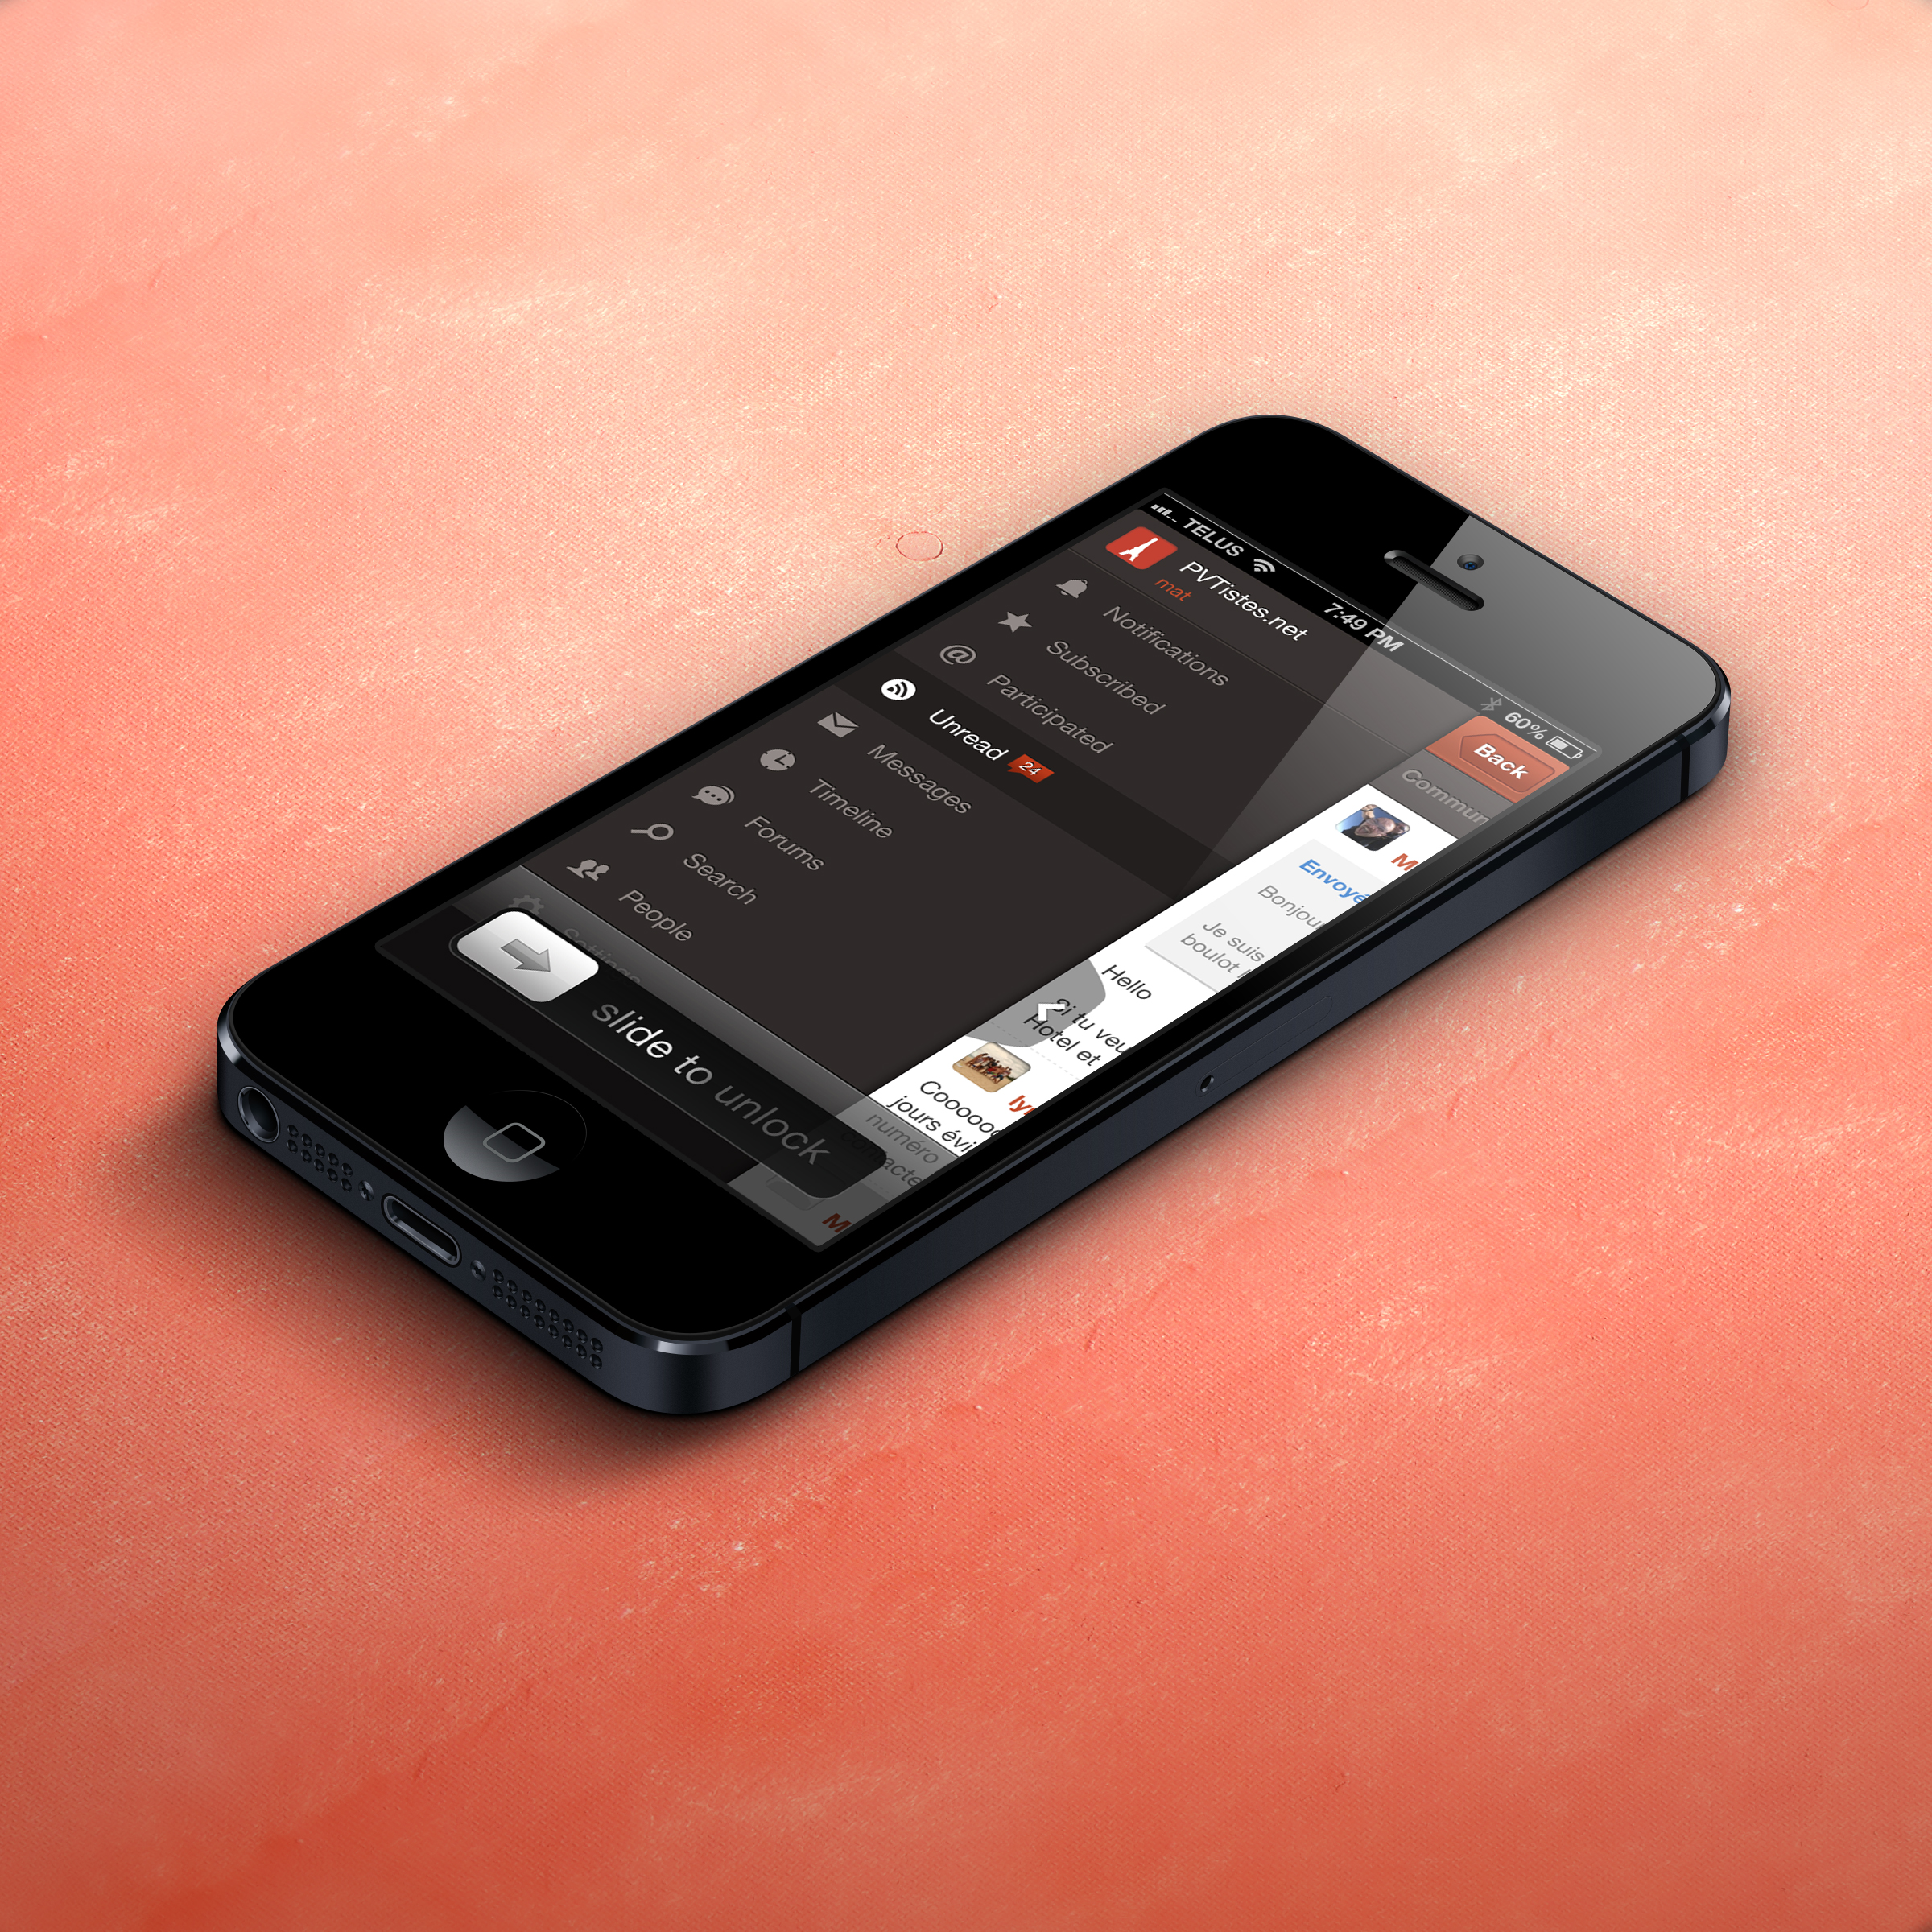 Nom : iPhone-5-3D-view-MockUp.jpg
Affichages : 1010
Taille : 4,59 Mo